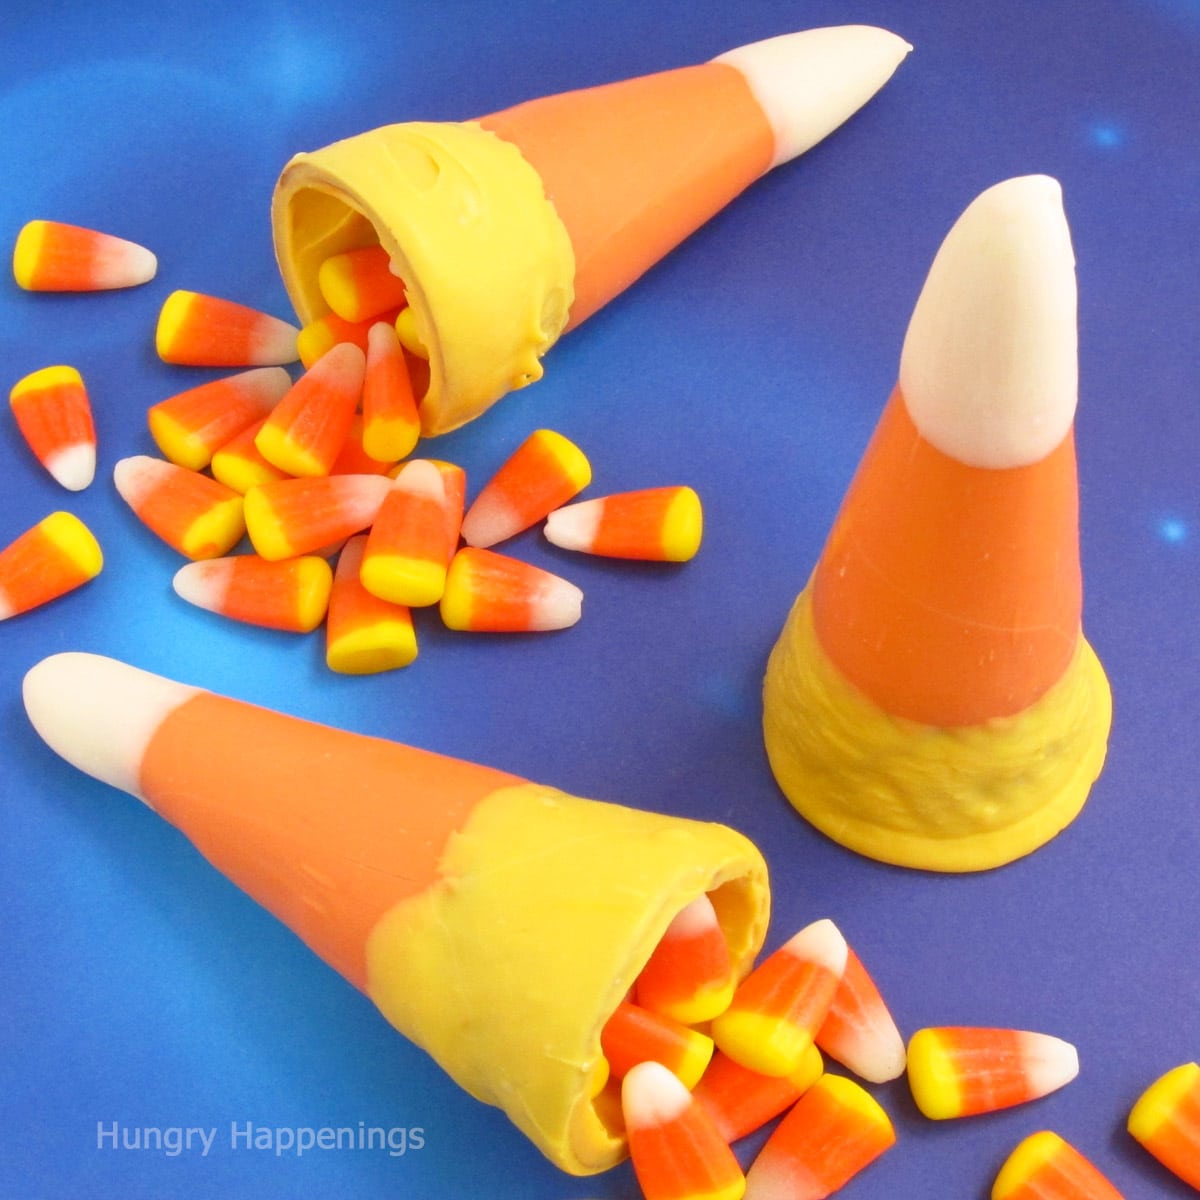 candy corn cones made with sugar cones dipped in white, yellow, and orange candy melts.